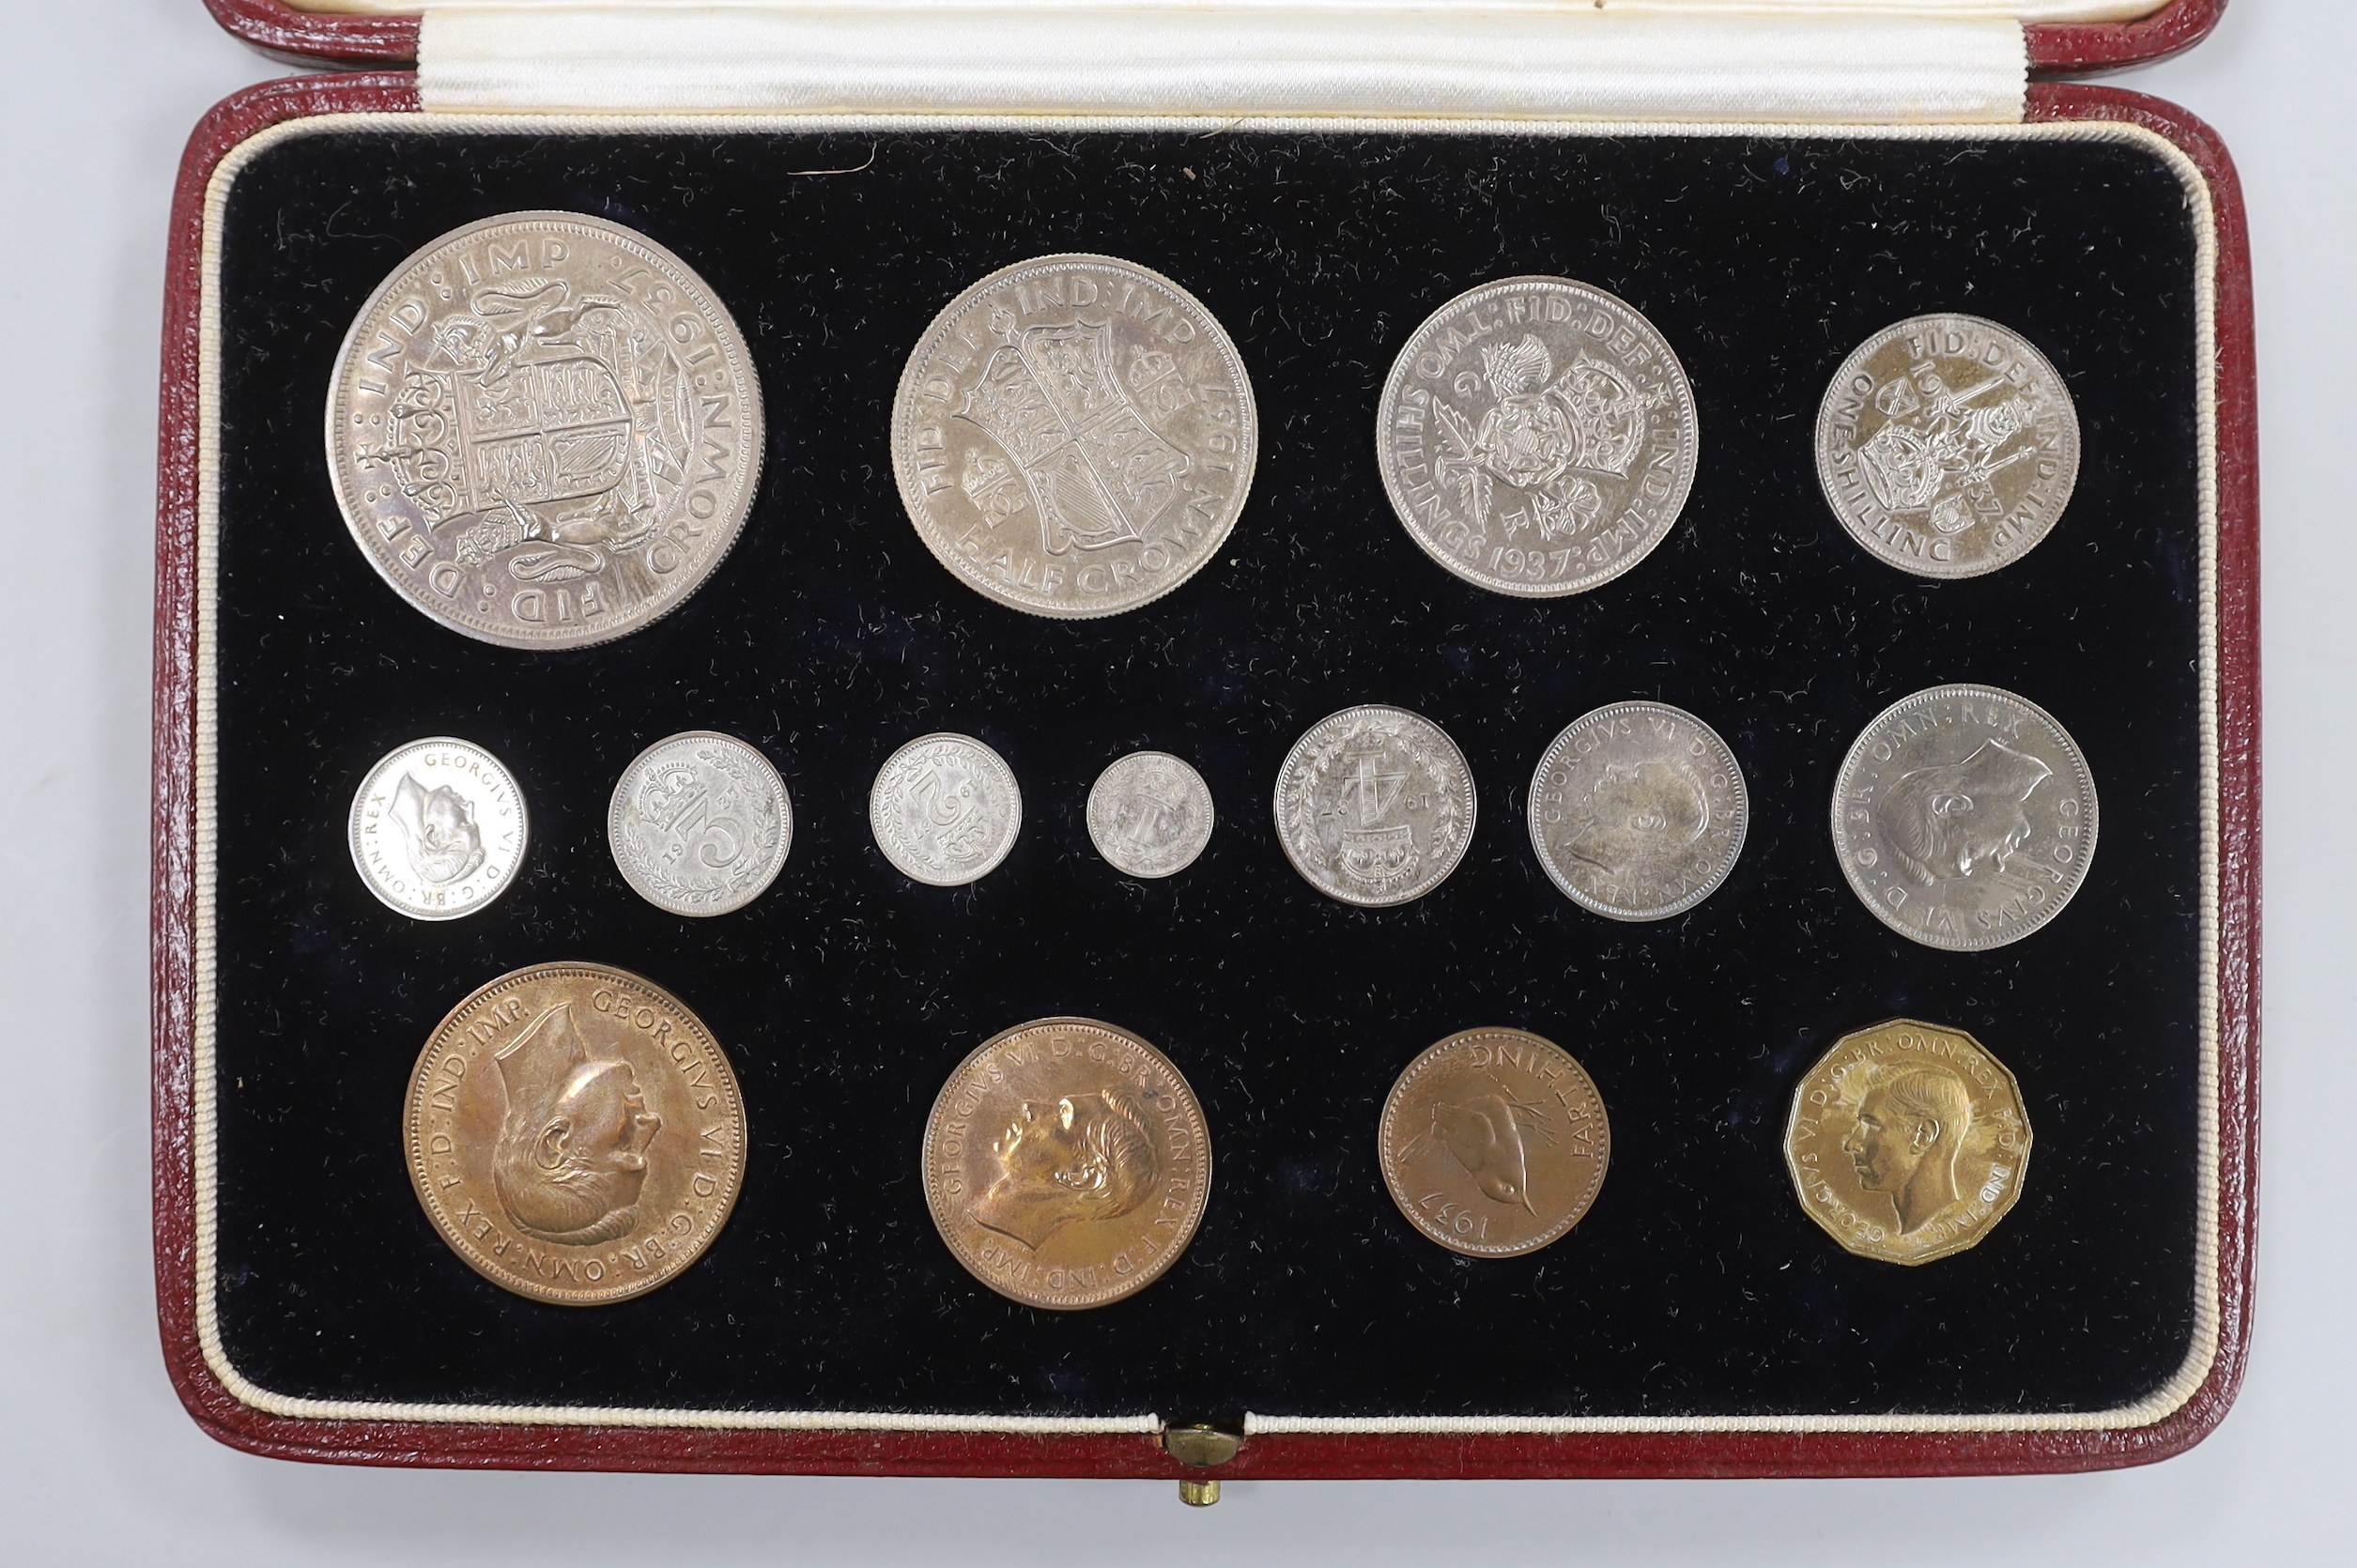 A cased George VI 1937 coronation specimen coin set, Including maundy 1d - 4d, and farthing through to crown, 15 coins